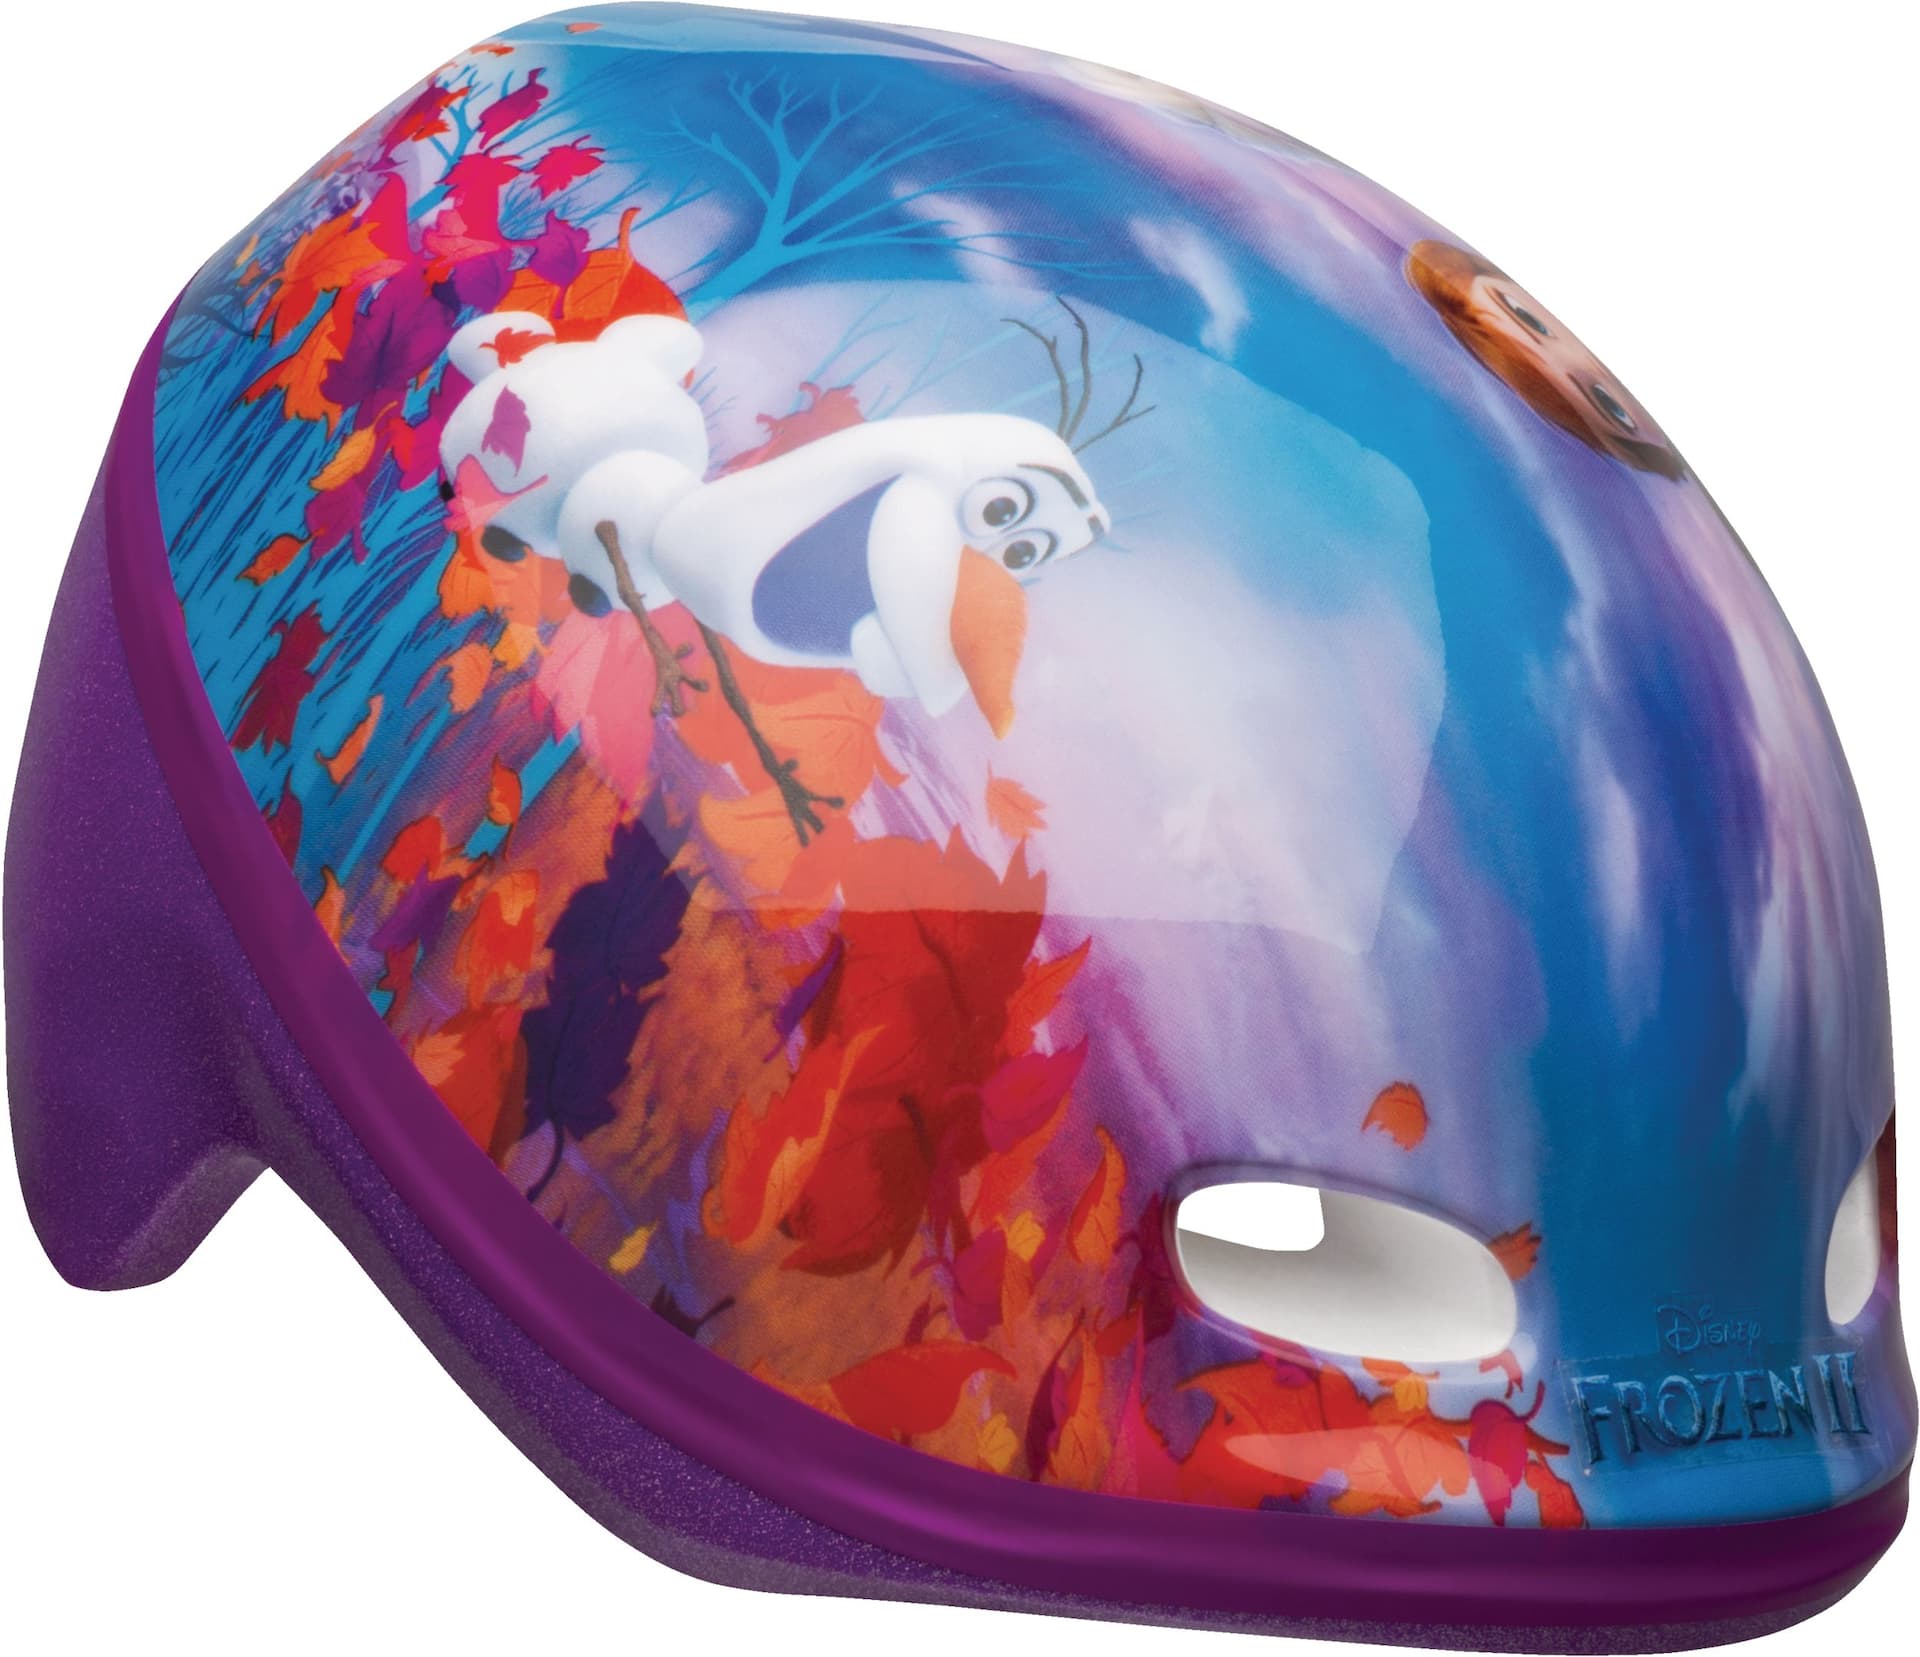 https://media-www.canadiantire.ca/product/playing/cycling/bicycle-accessories/0730516/frozen-2-2d-helmet-toddler-82b82da9-b6bd-4900-8113-ce6ca1bb33e7-jpgrendition.jpg